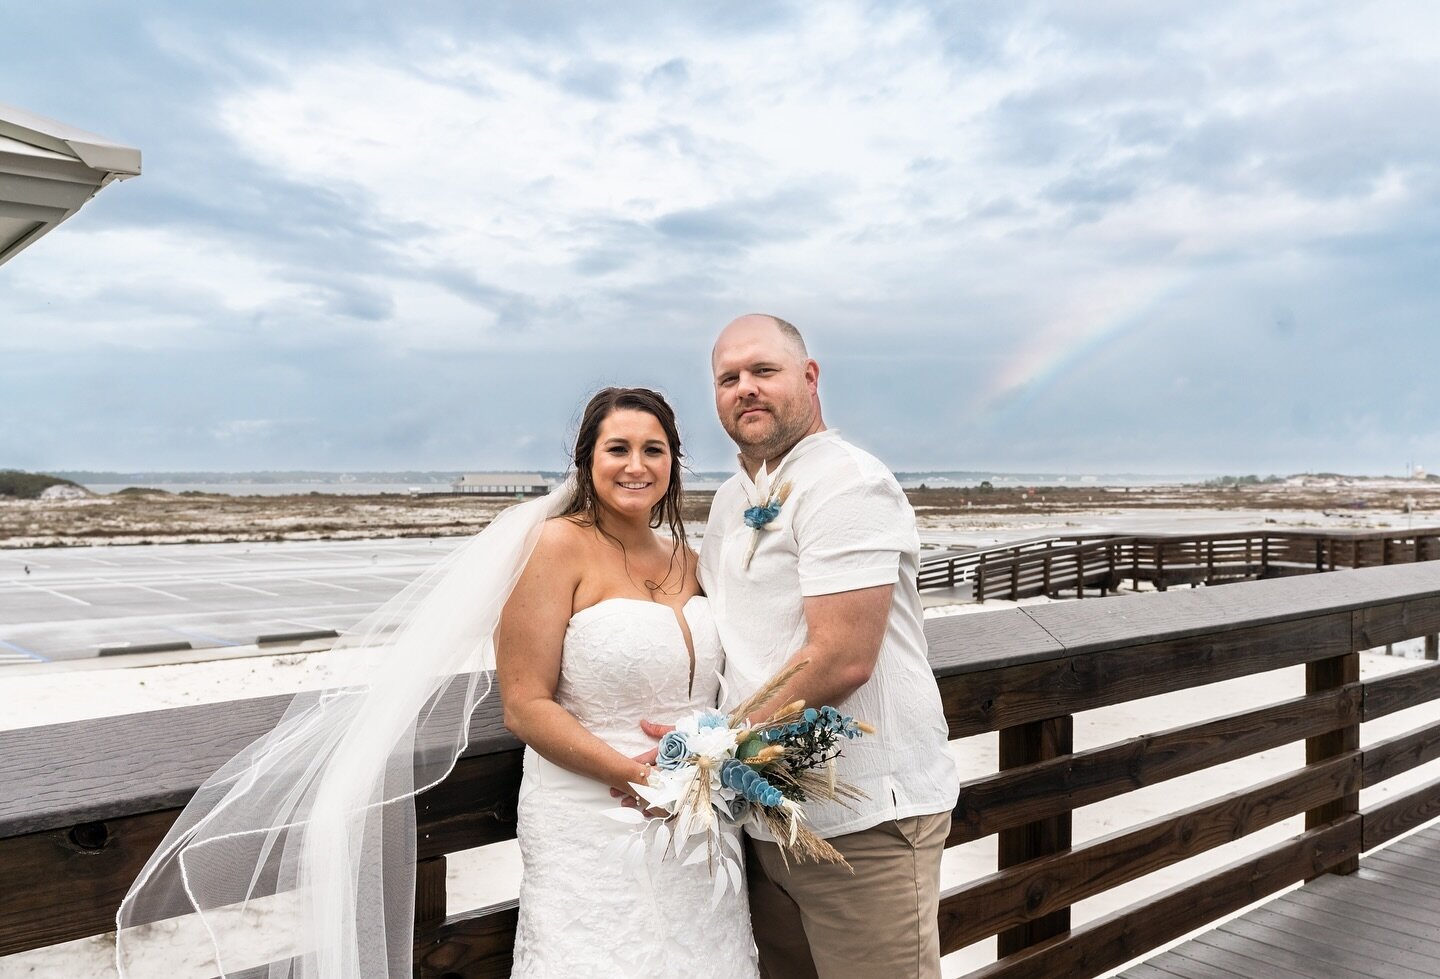 Sara &amp; Caleb had some rain on their special day (thank goodness she loves thunderstorms because it was getting down) but take a look at the rainbow we caught! 

Rain doesn&rsquo;t mean your wedding is &ldquo;ruined&rdquo;, just remain positive an